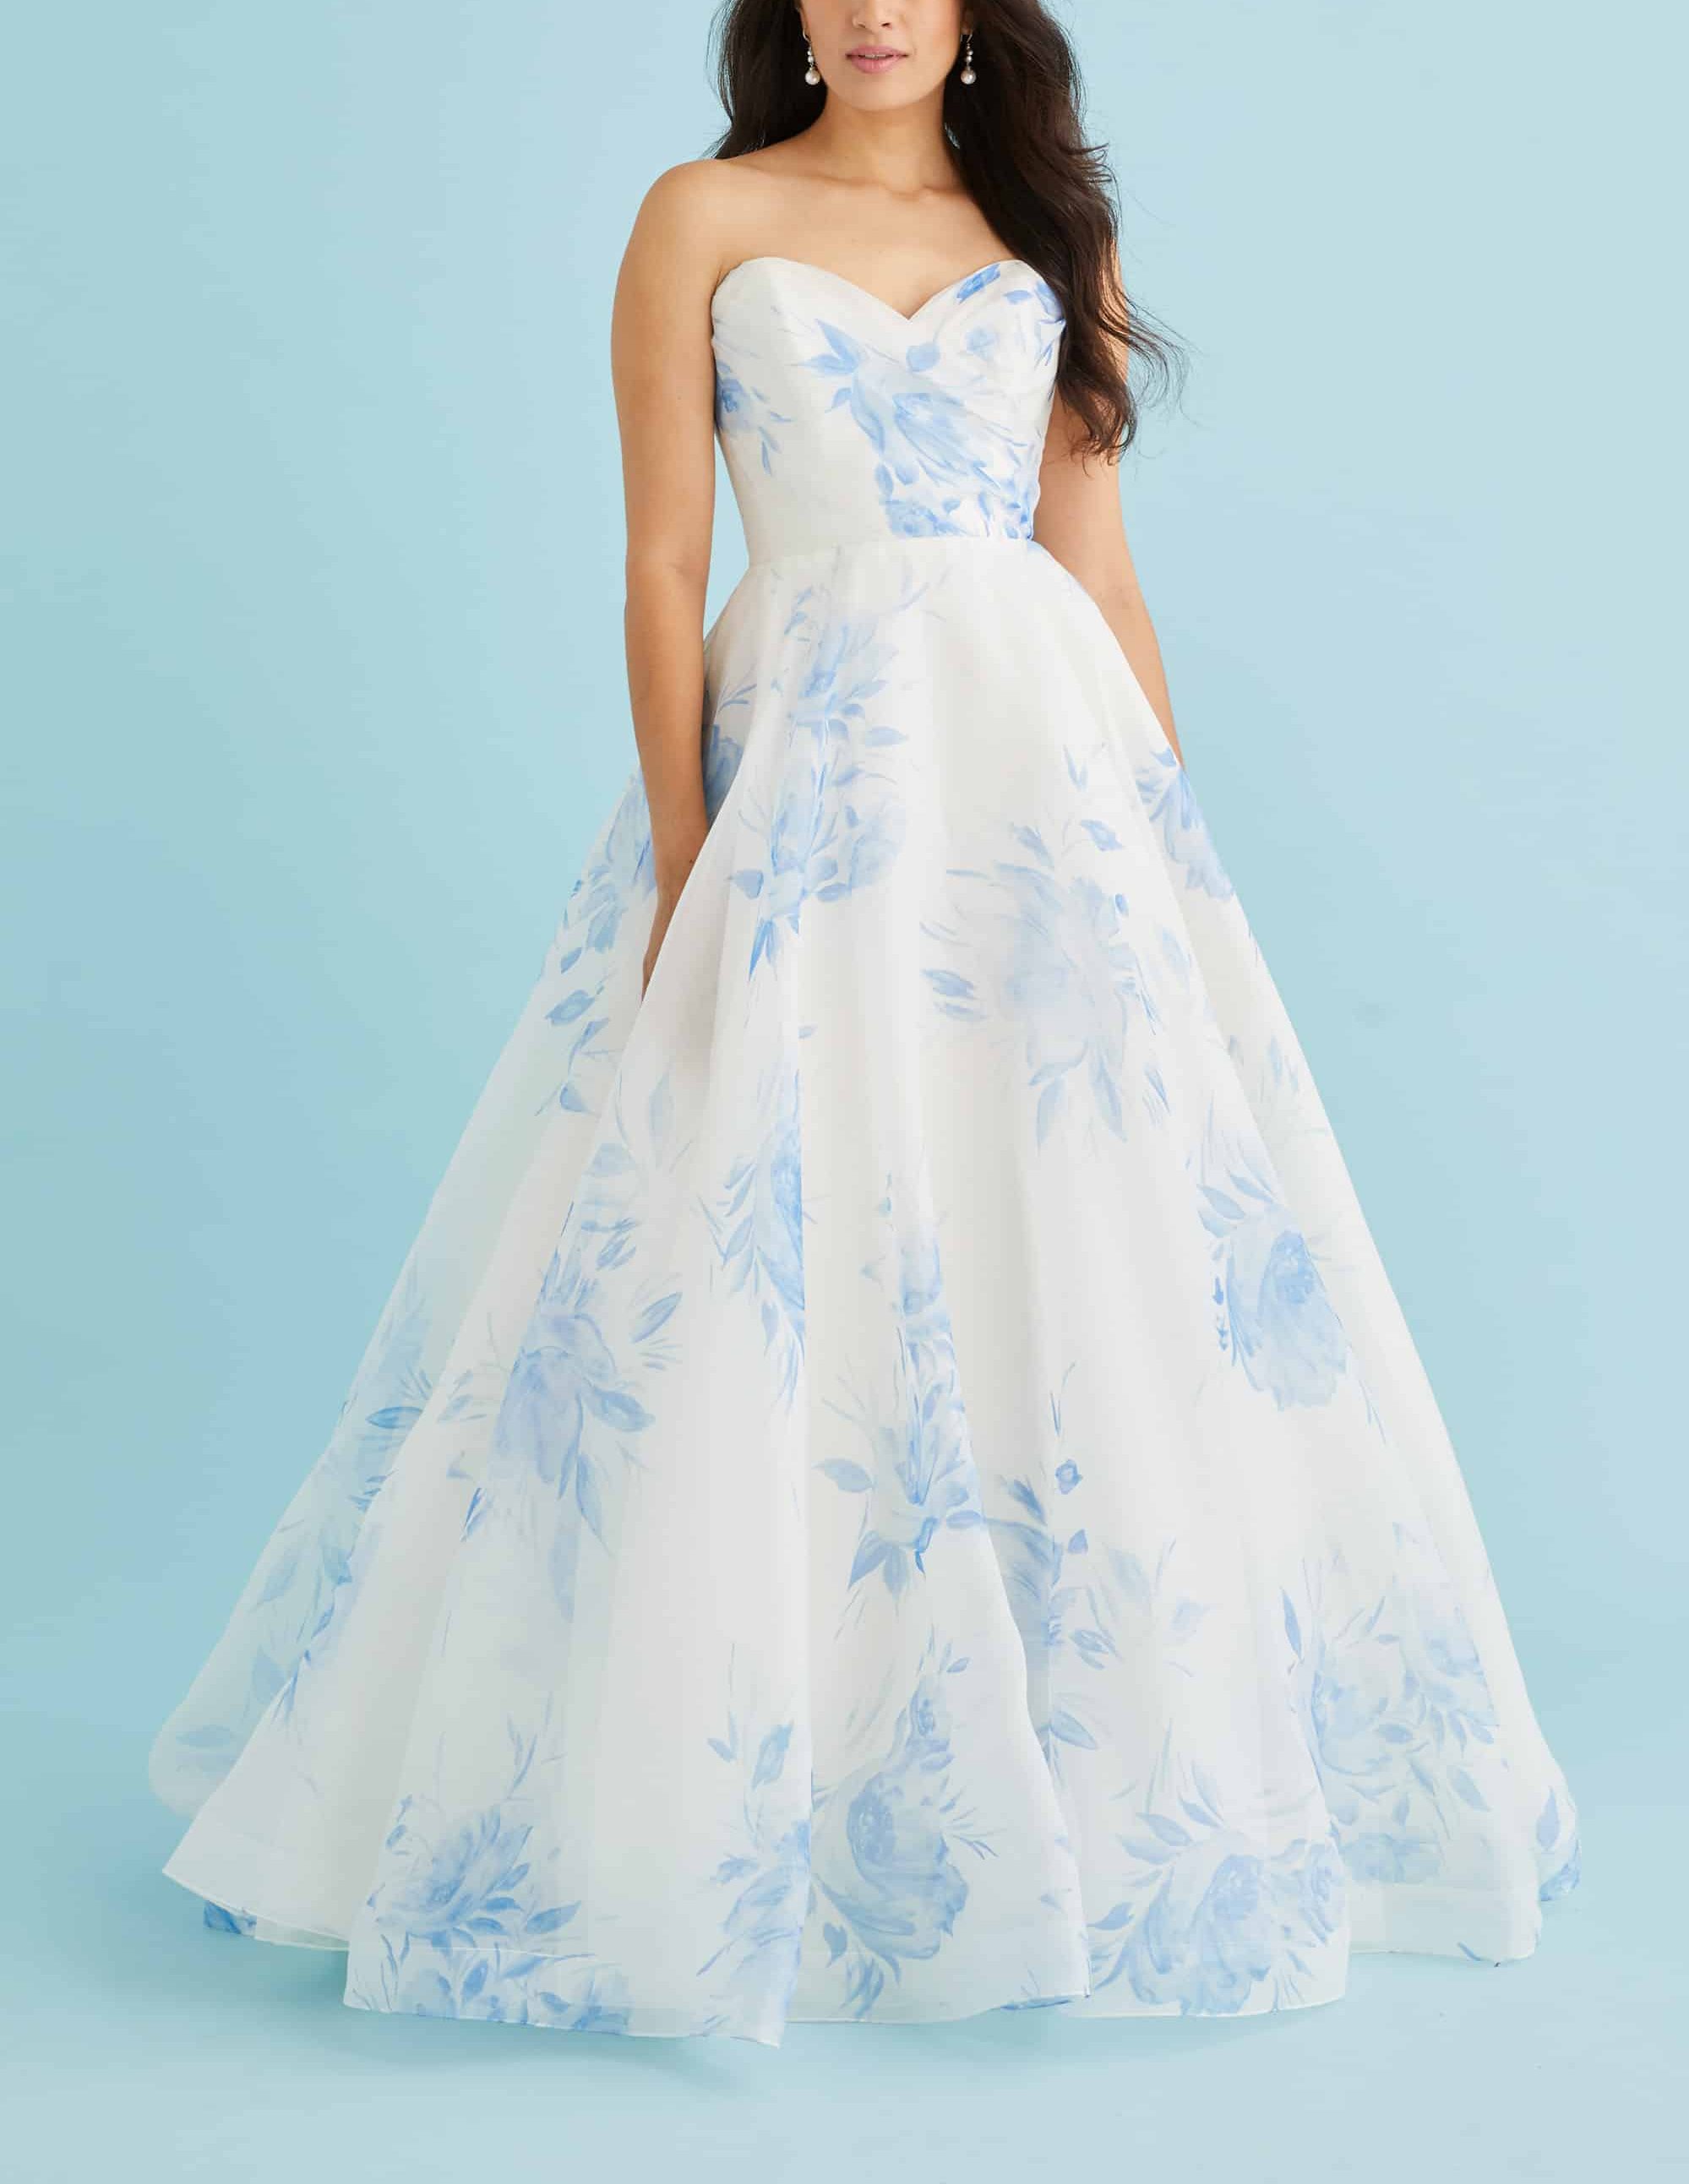 A soft organza Lea-Ann Belter Blythe ballgown. Organic ruching at the sweetheart bodice blooms into a full circle skirt with chapel train. Button-and-loop closure. Find your dream wedding dress at Your Dream Bridal near Boston.